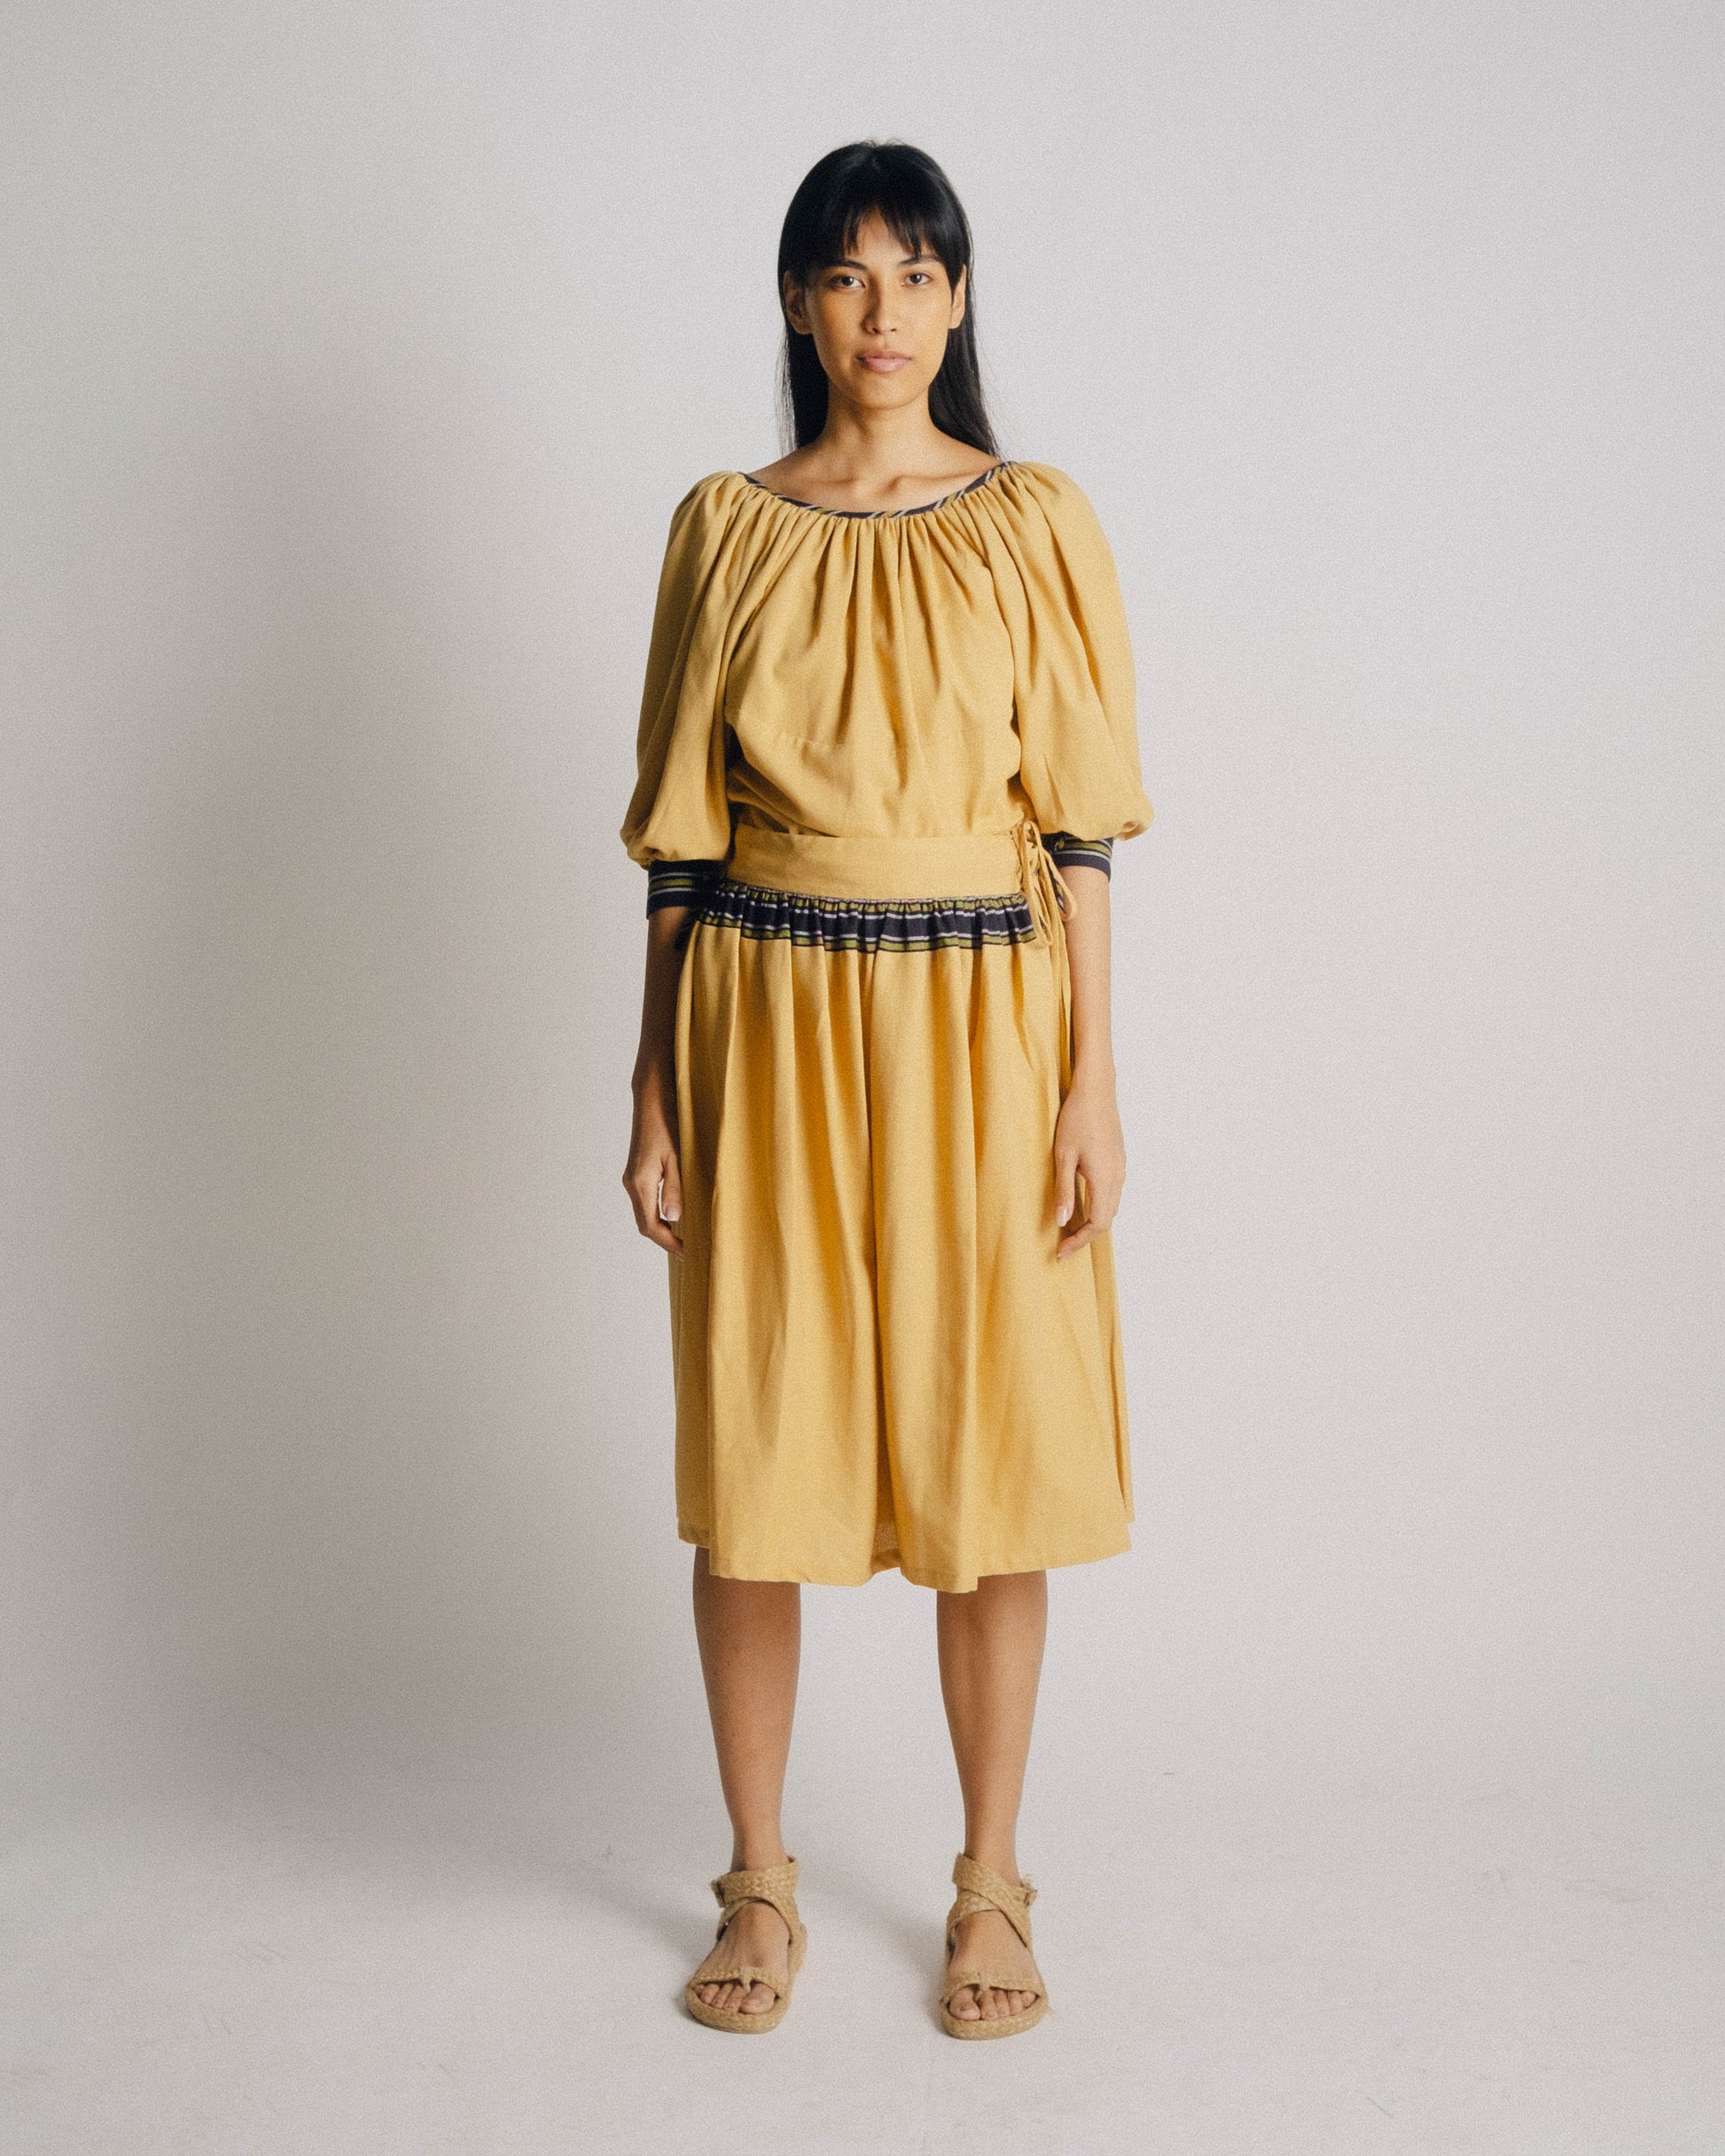 olive skirt handwoven by Filipino Weavers, one size fits all